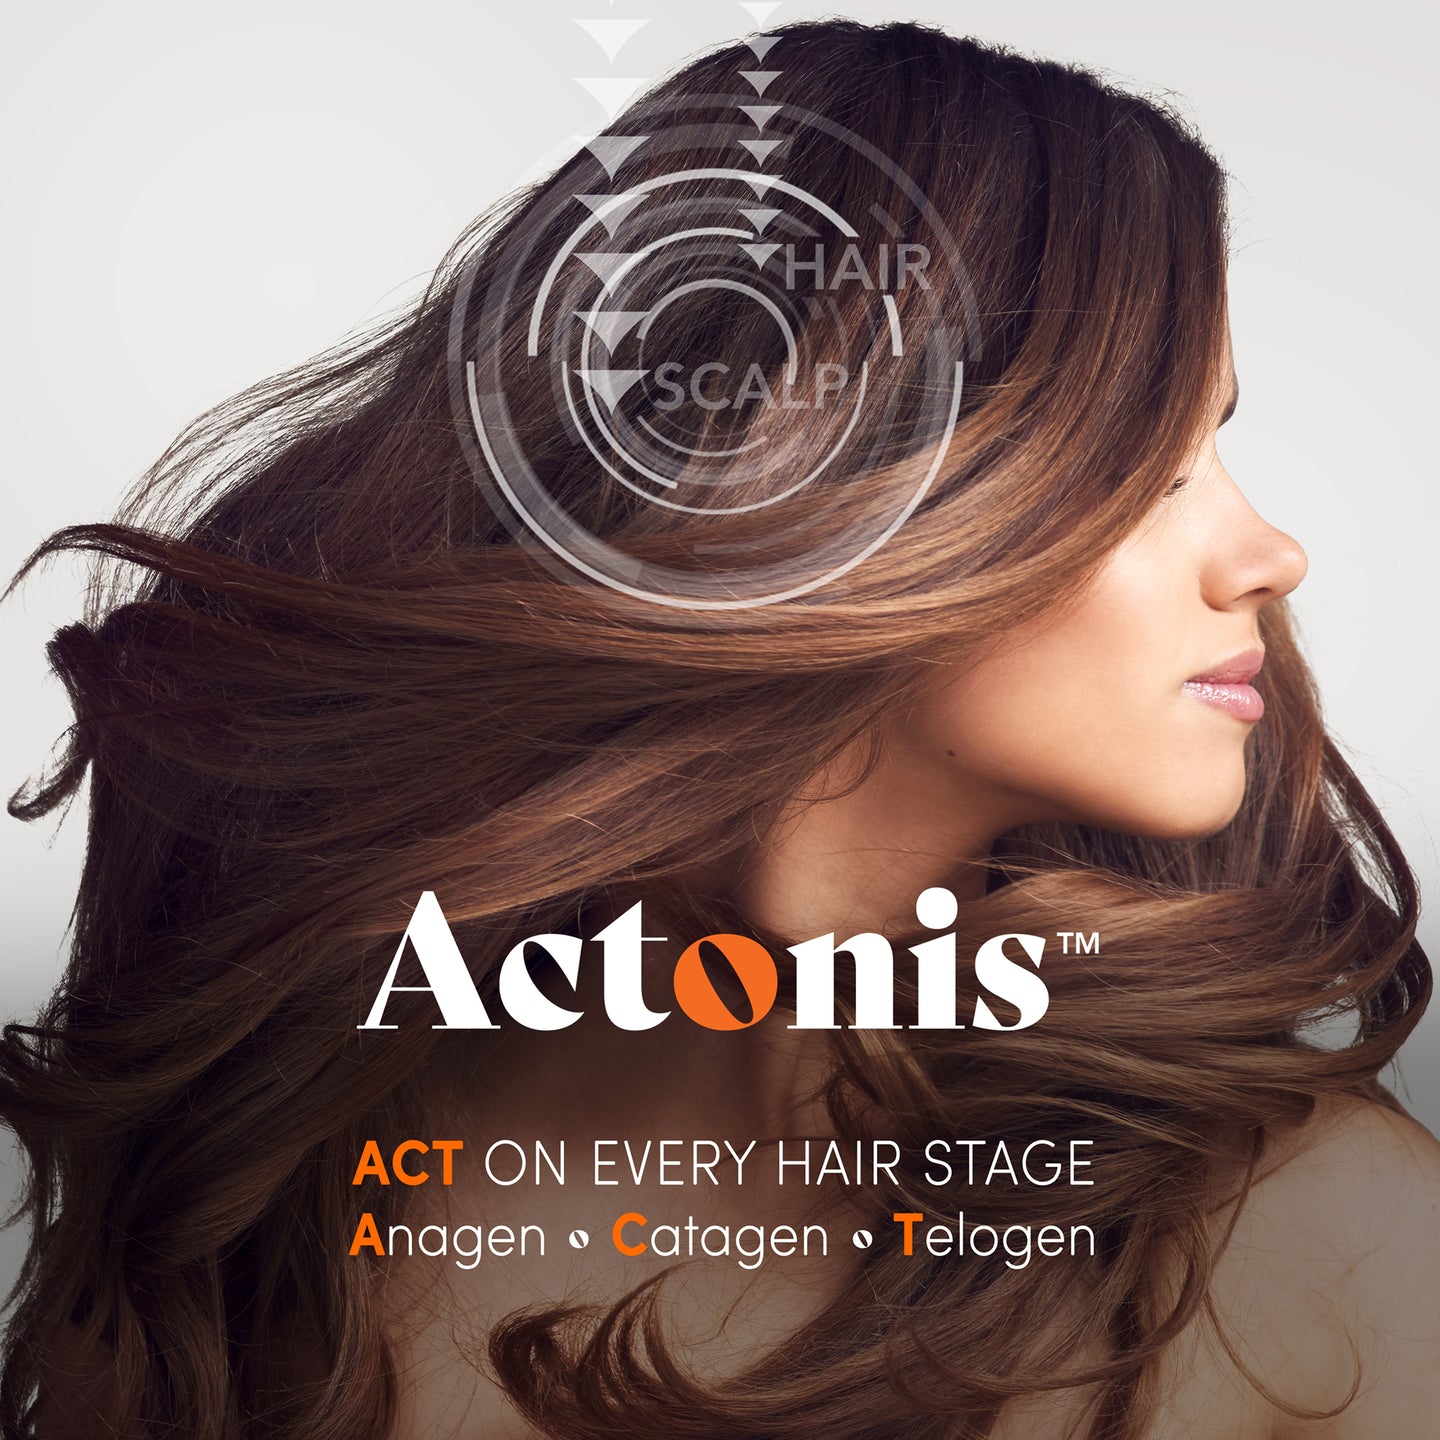 Actonis™ Hair & Scalp Dual Action Supplements